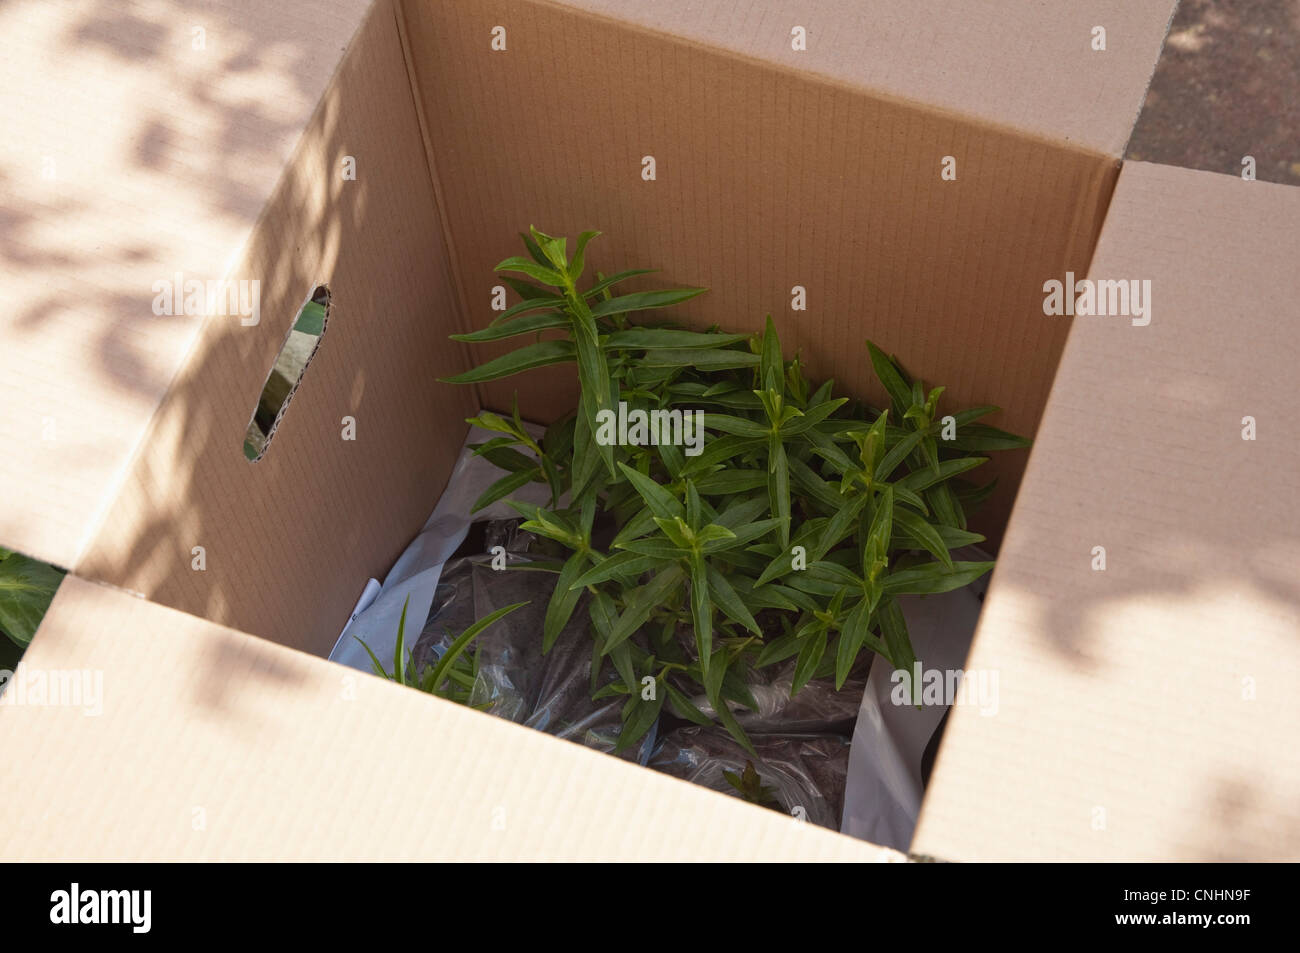 Herbaceous plants bought online and delivered safely by post in a box / package designed for the purpose. UK. Stock Photo